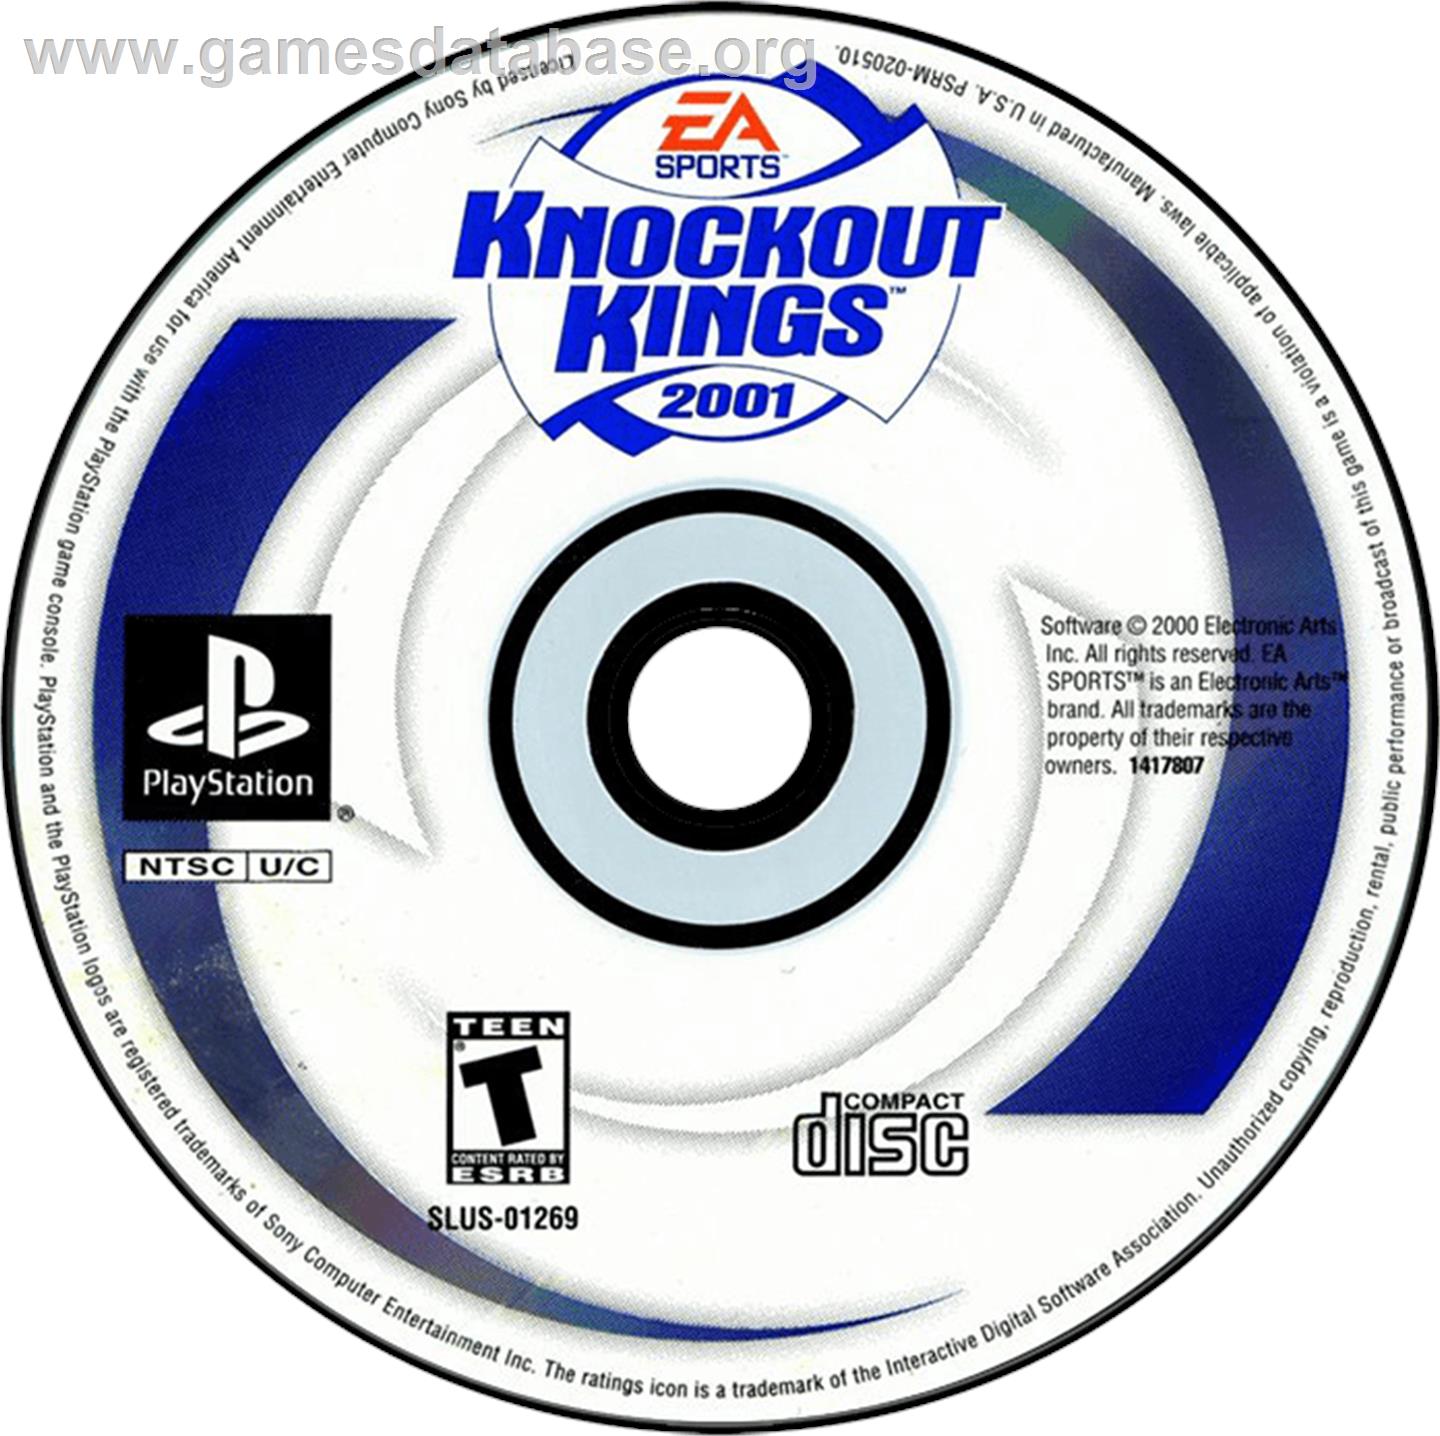 Knockout Kings 2001 - Sony Playstation - Artwork - Disc